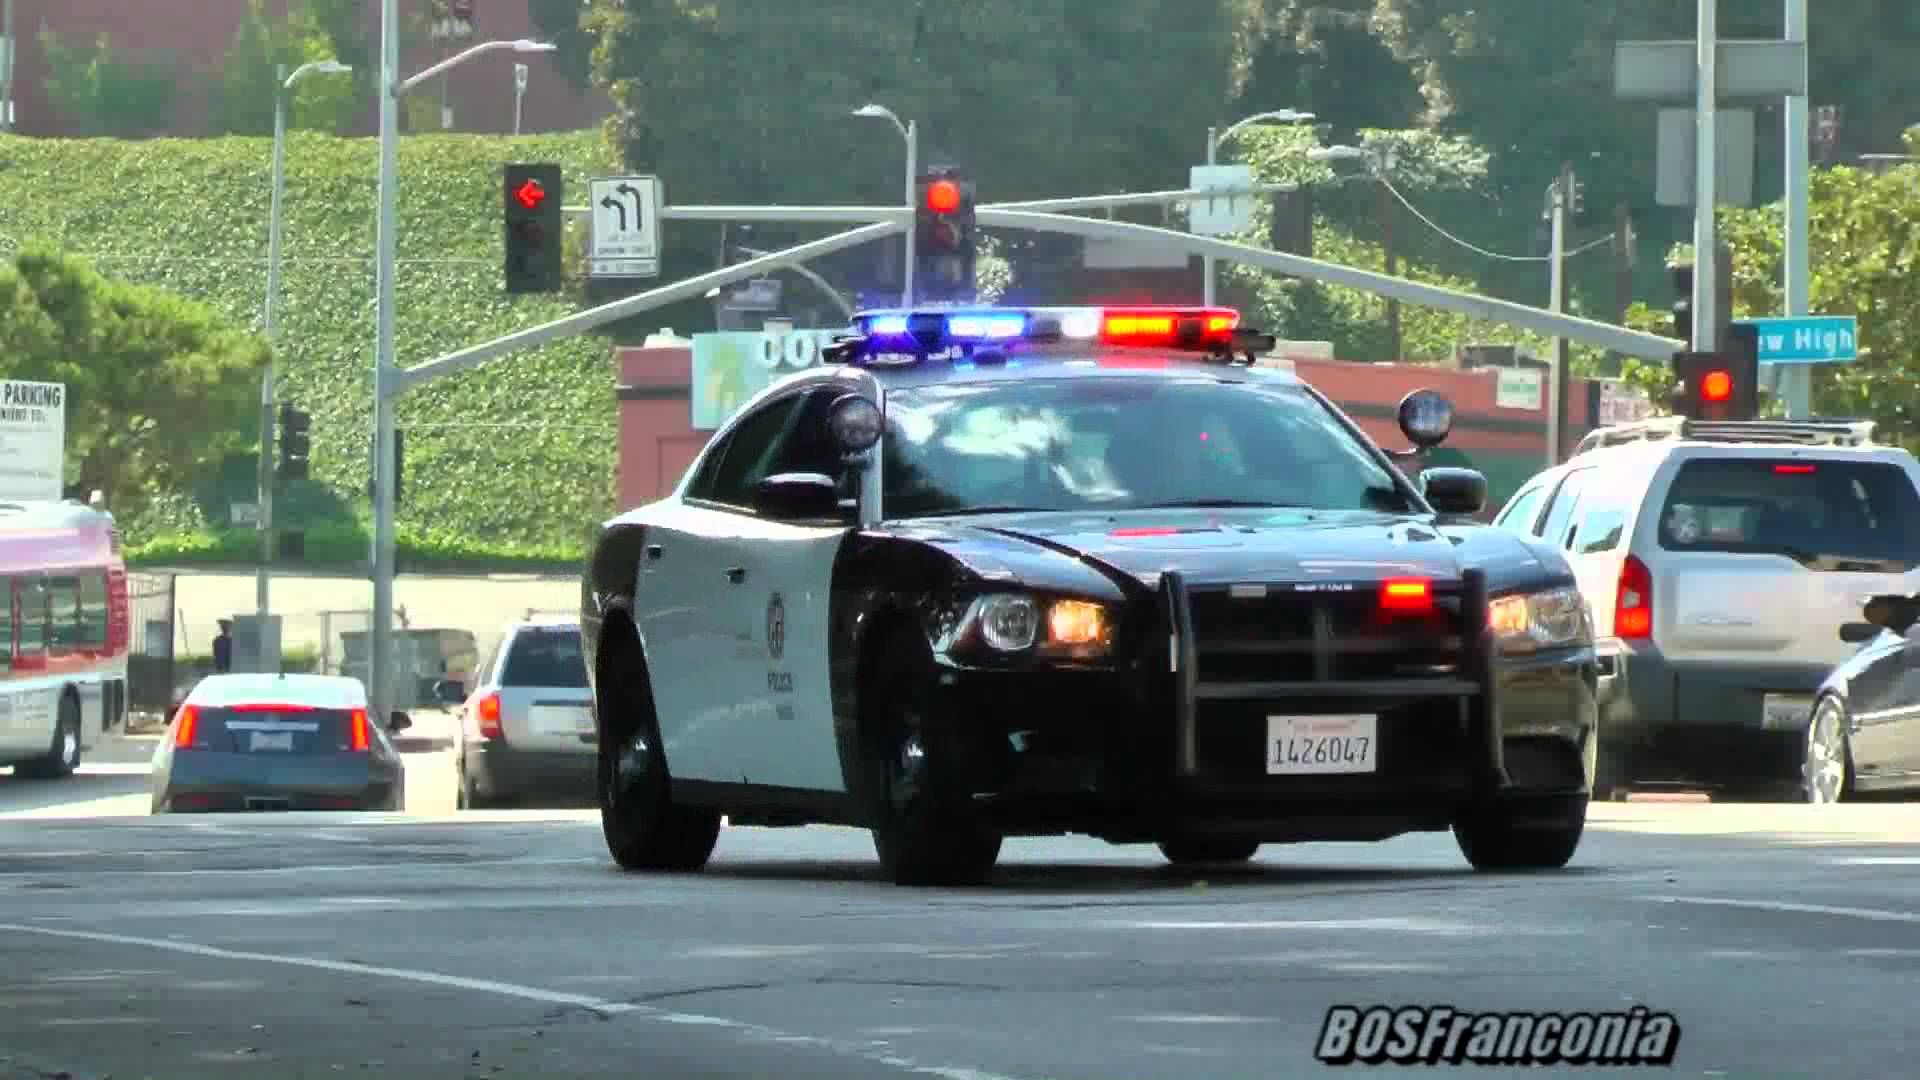 LAPD Dodge Charger responding